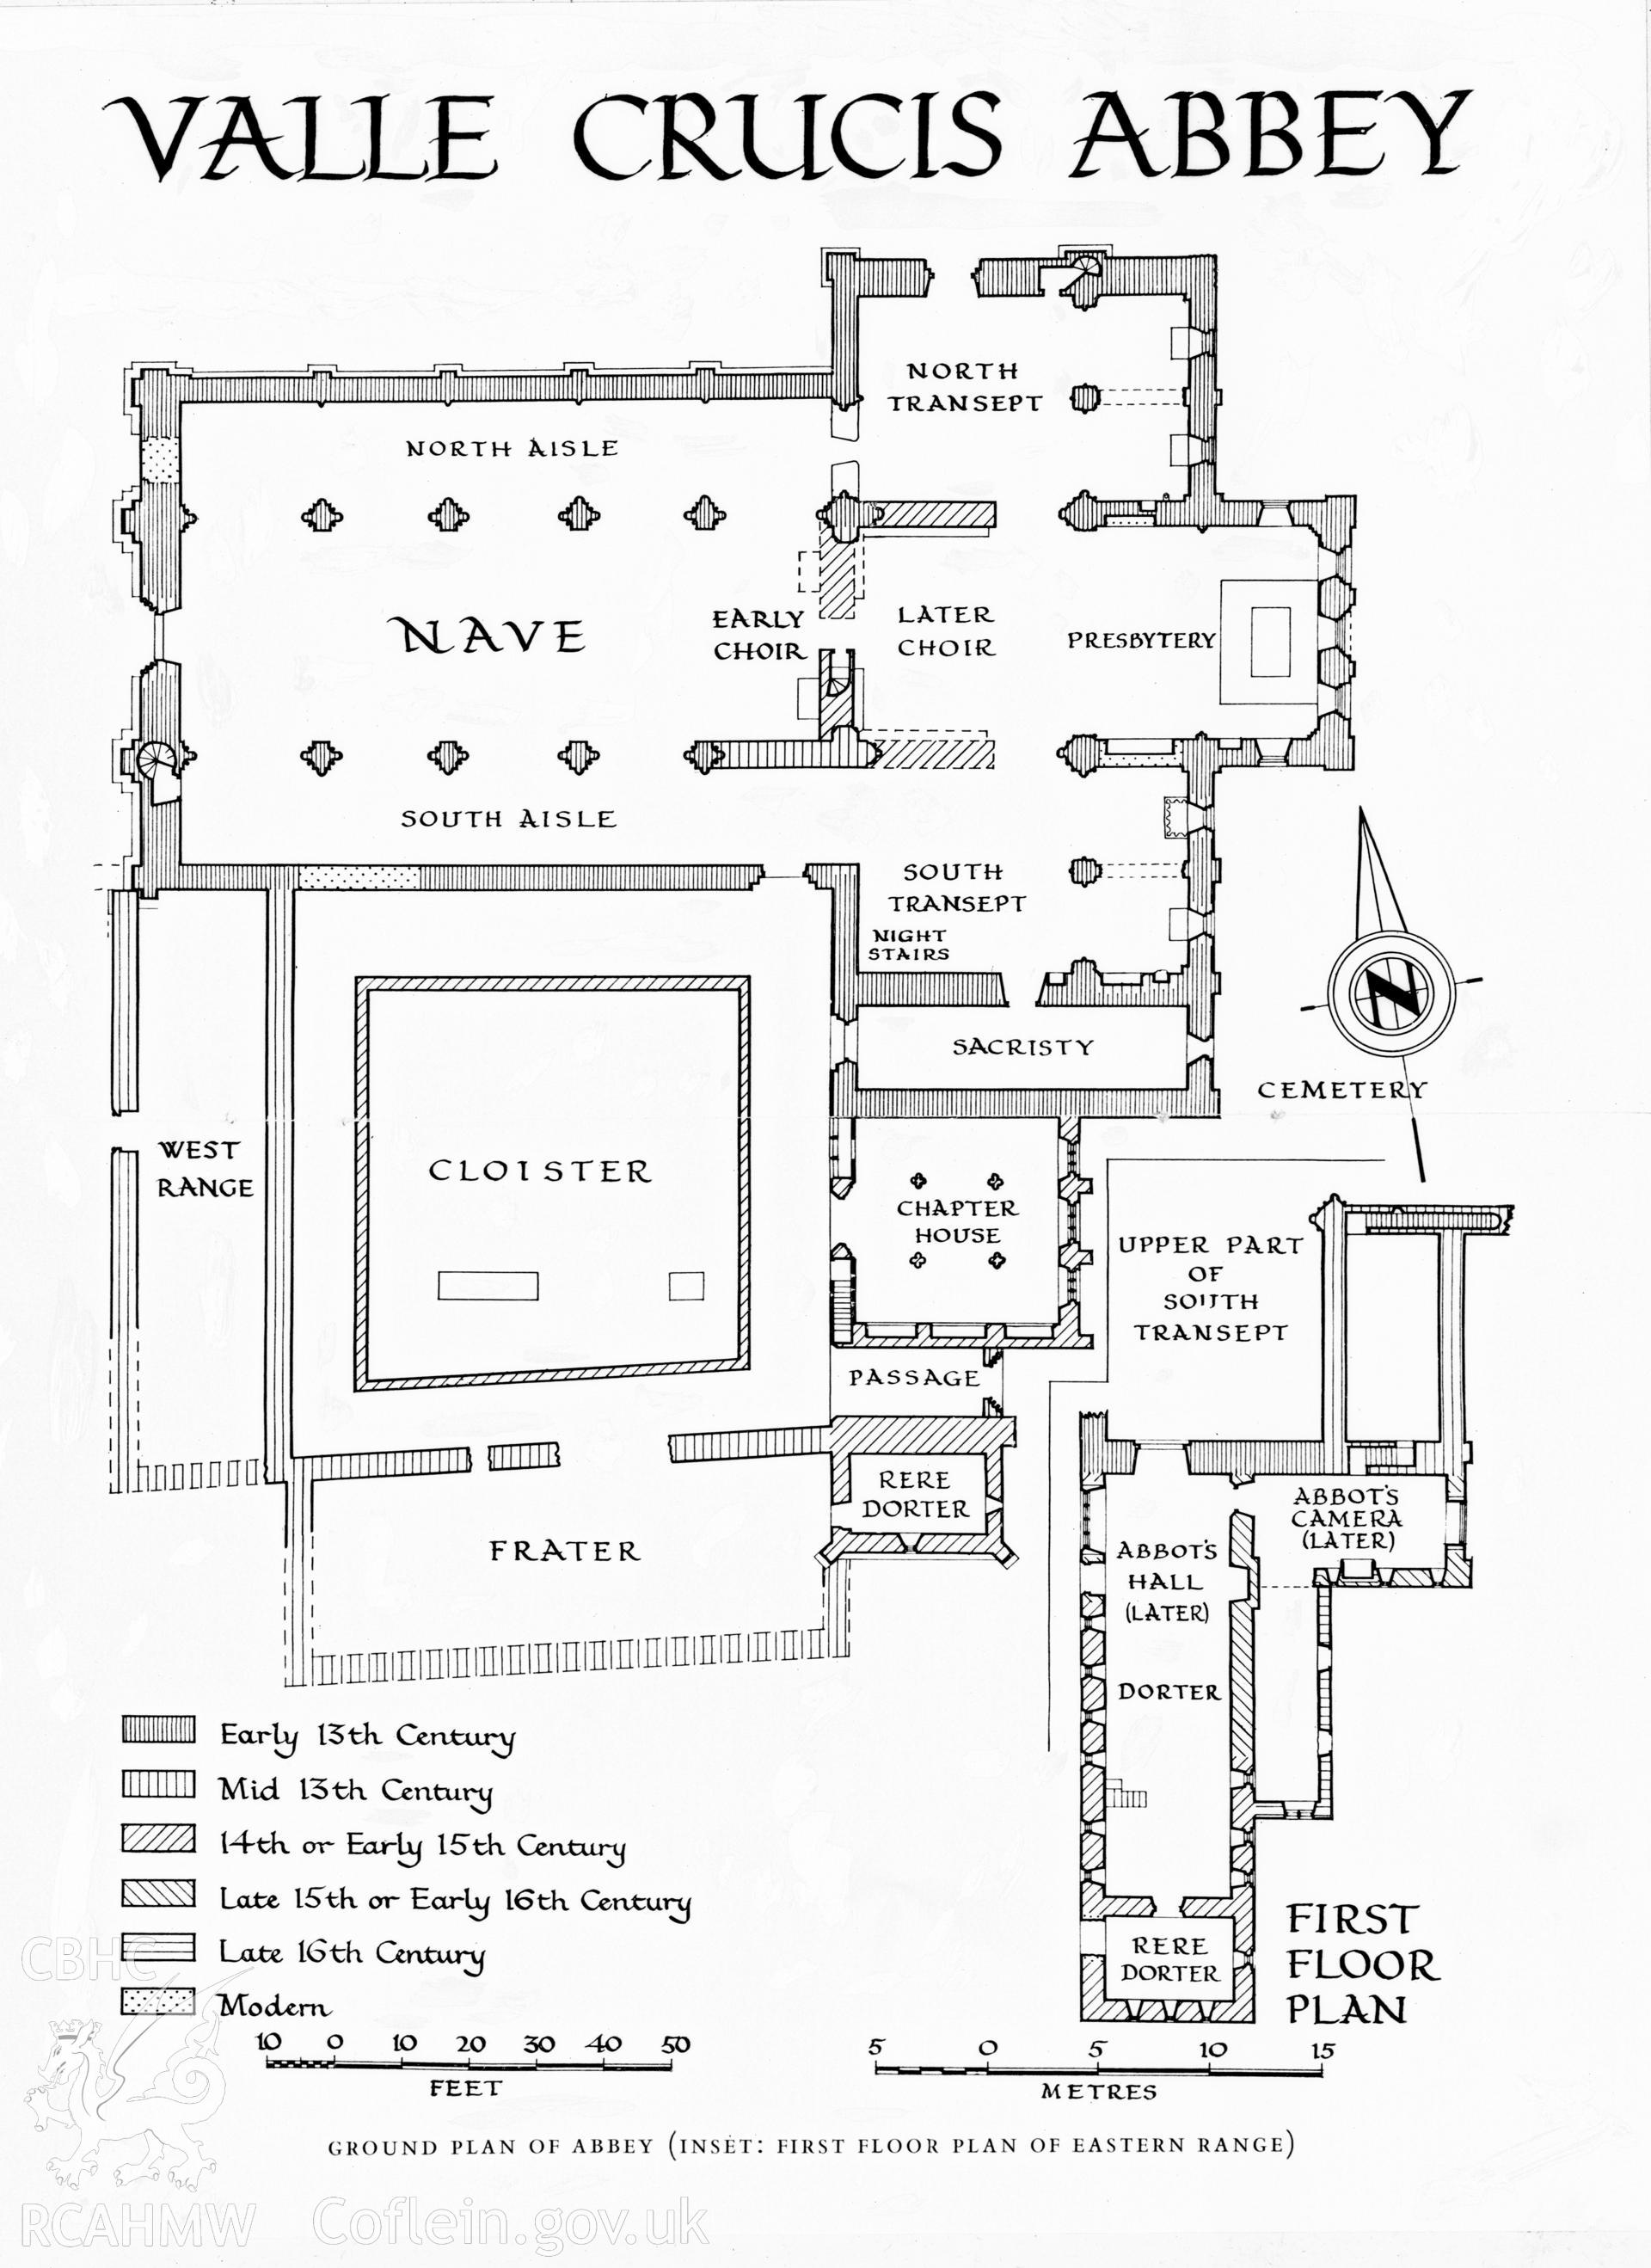 Black and white negative relating to Valle Crucis Abbey: ground plan.